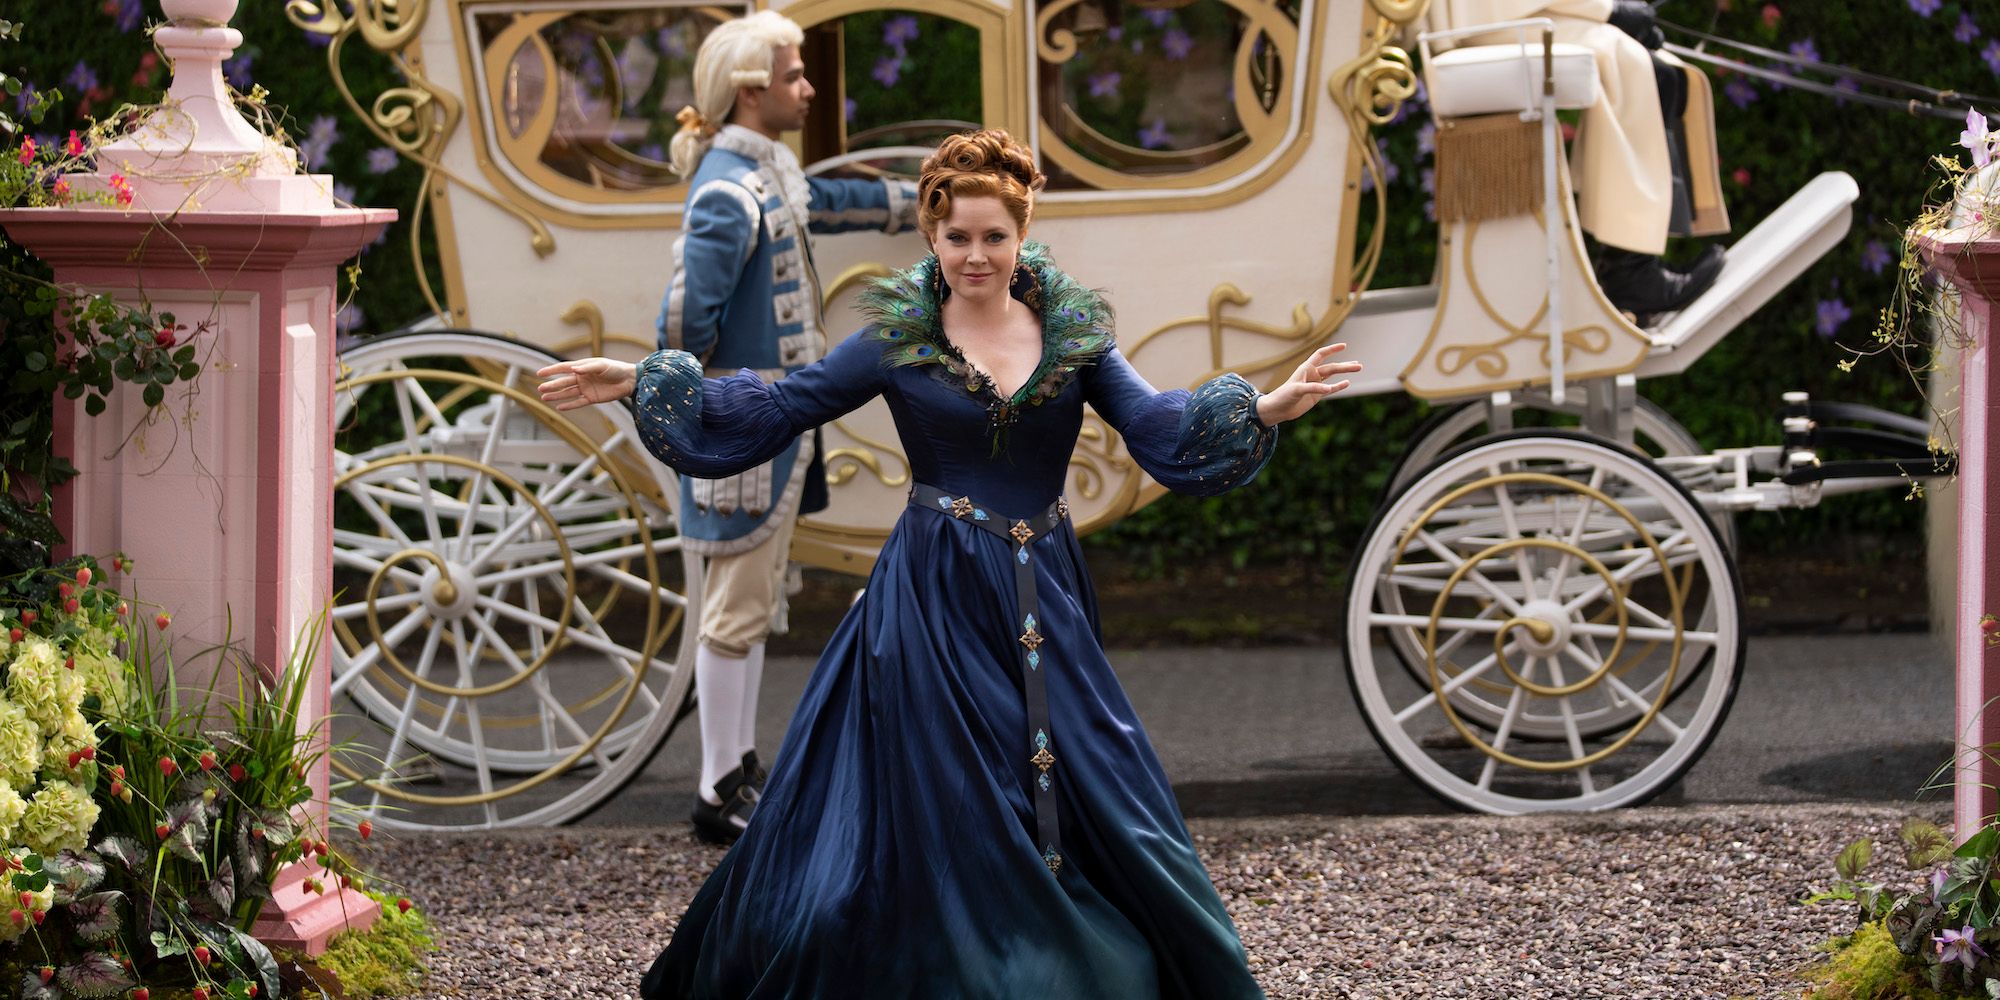 Giselle stands in front of a carriage from Disenchanted 